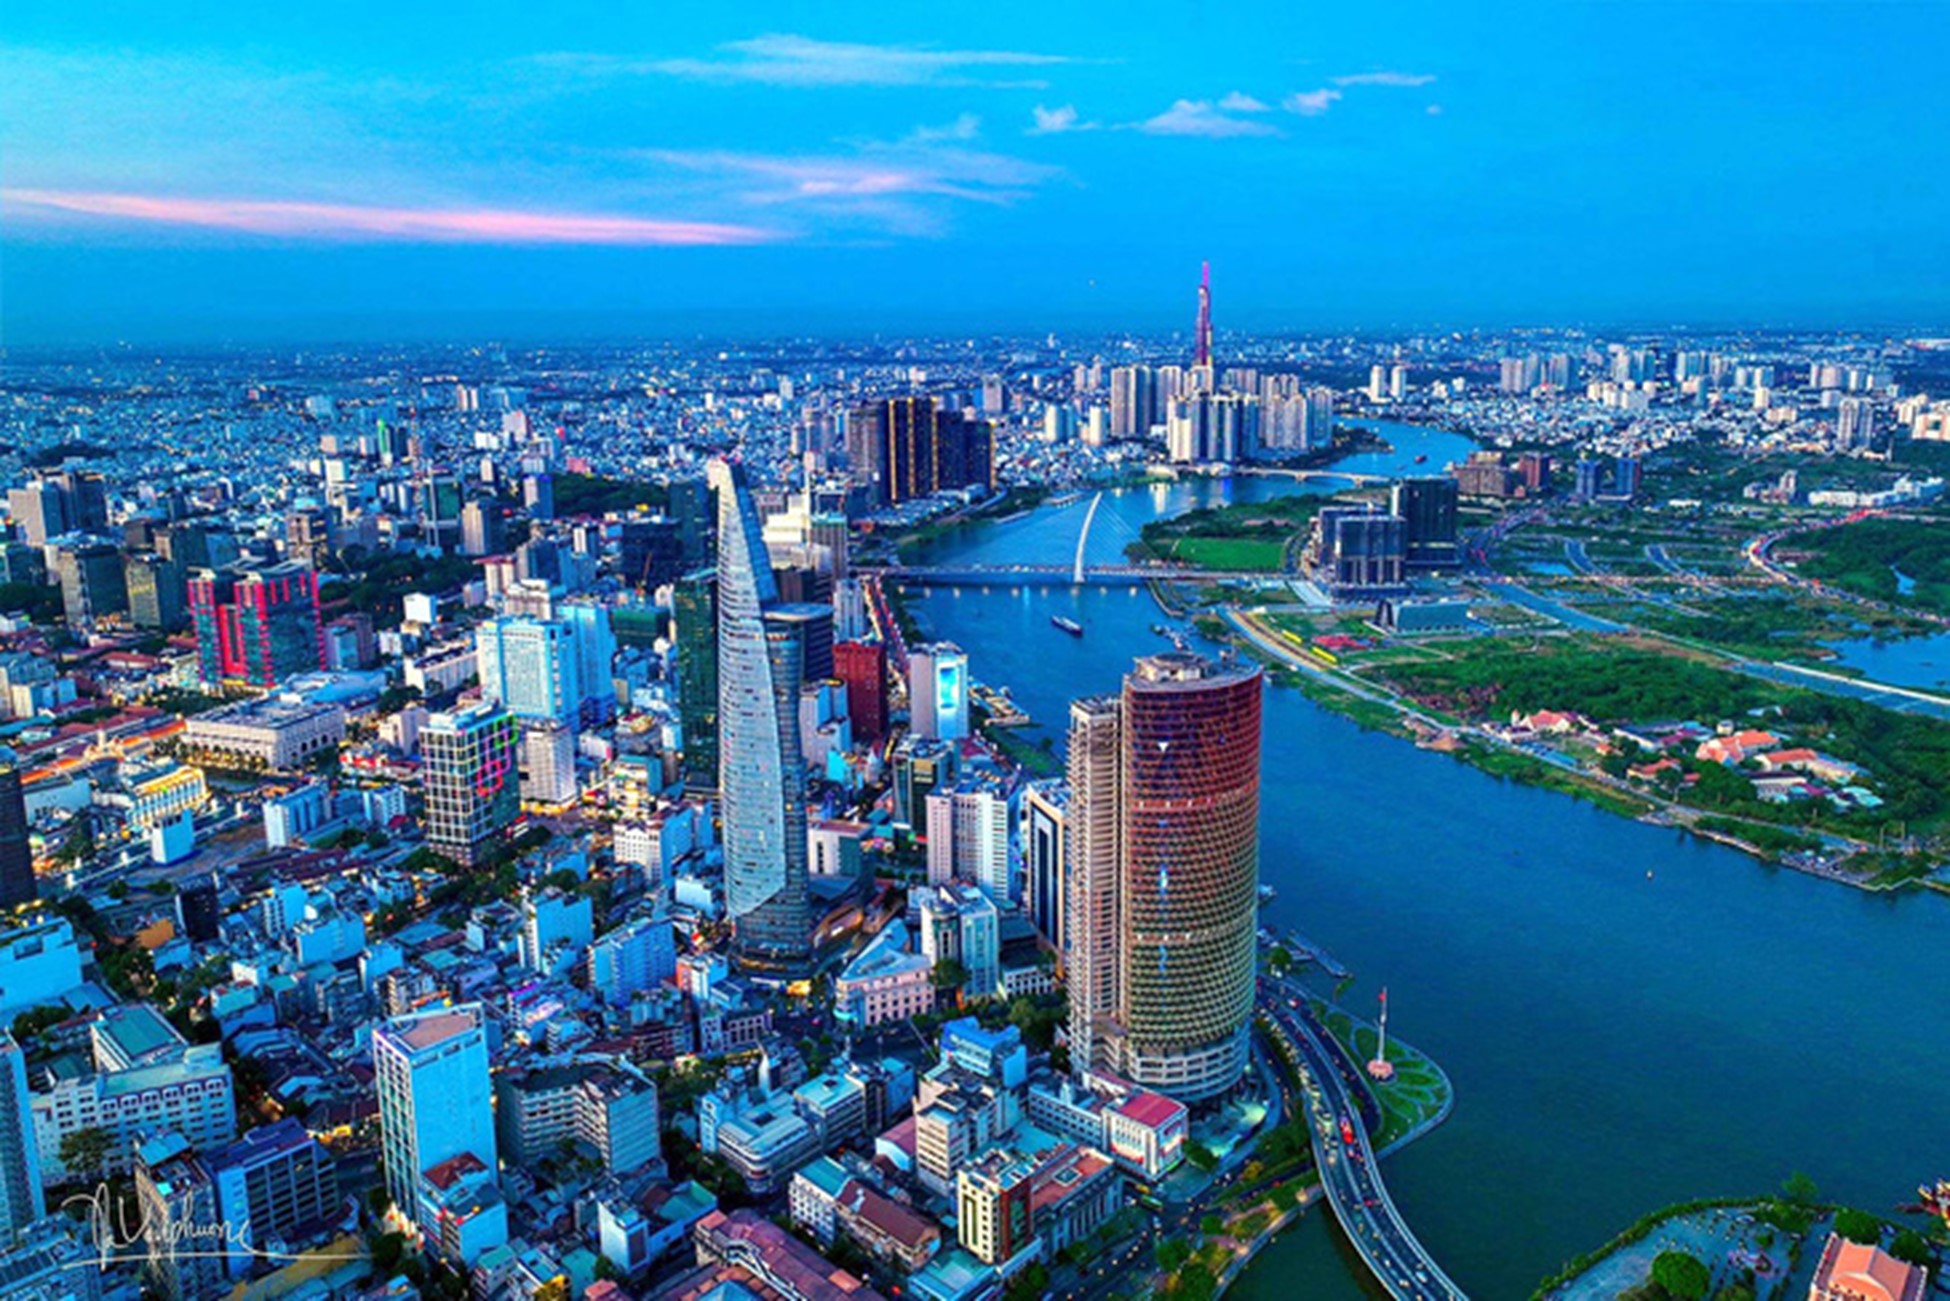 Ho Chi Minh City is prime for developing int'l financial center: former German vice-chancellor